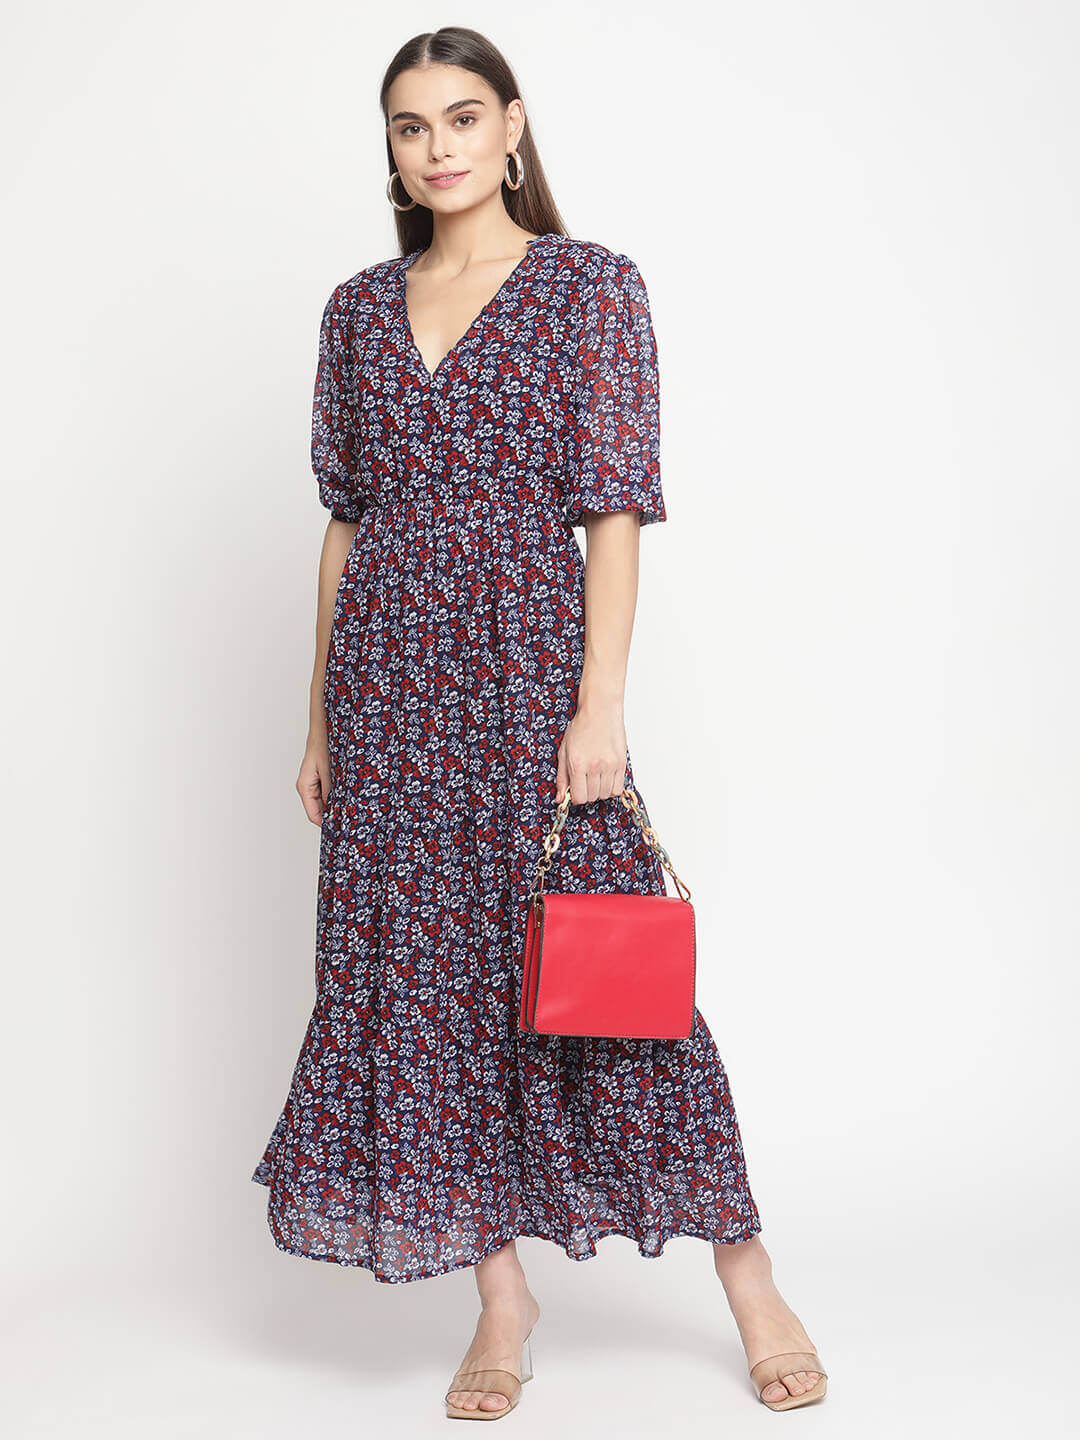 Printed Maxi Dress With Frill Details On Yoke